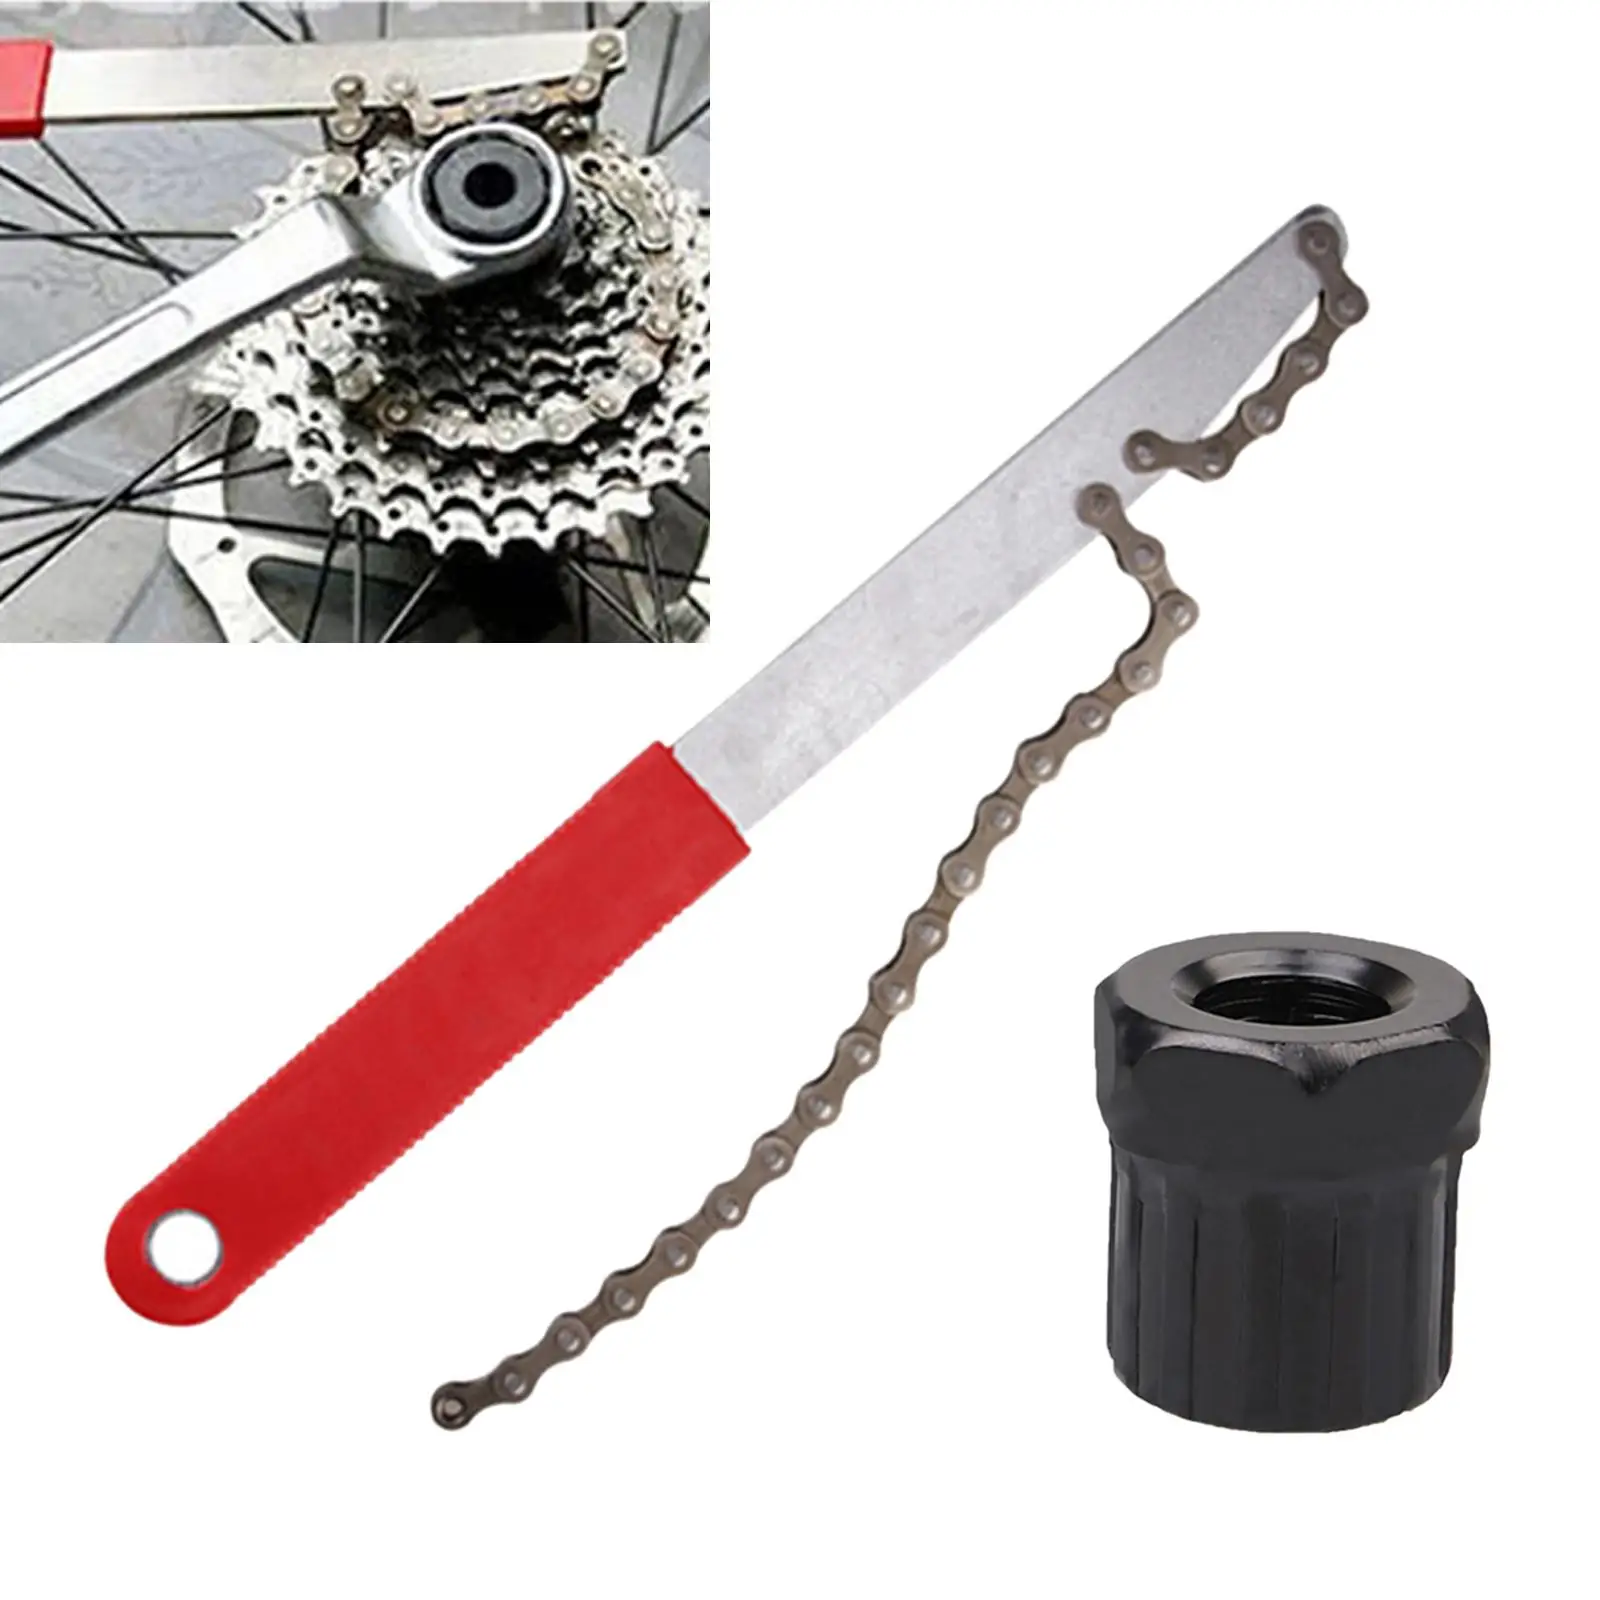 Cassette Cycle Bike Freewheel Chain Whip Sprocket Lockring Remover Tool Repair 